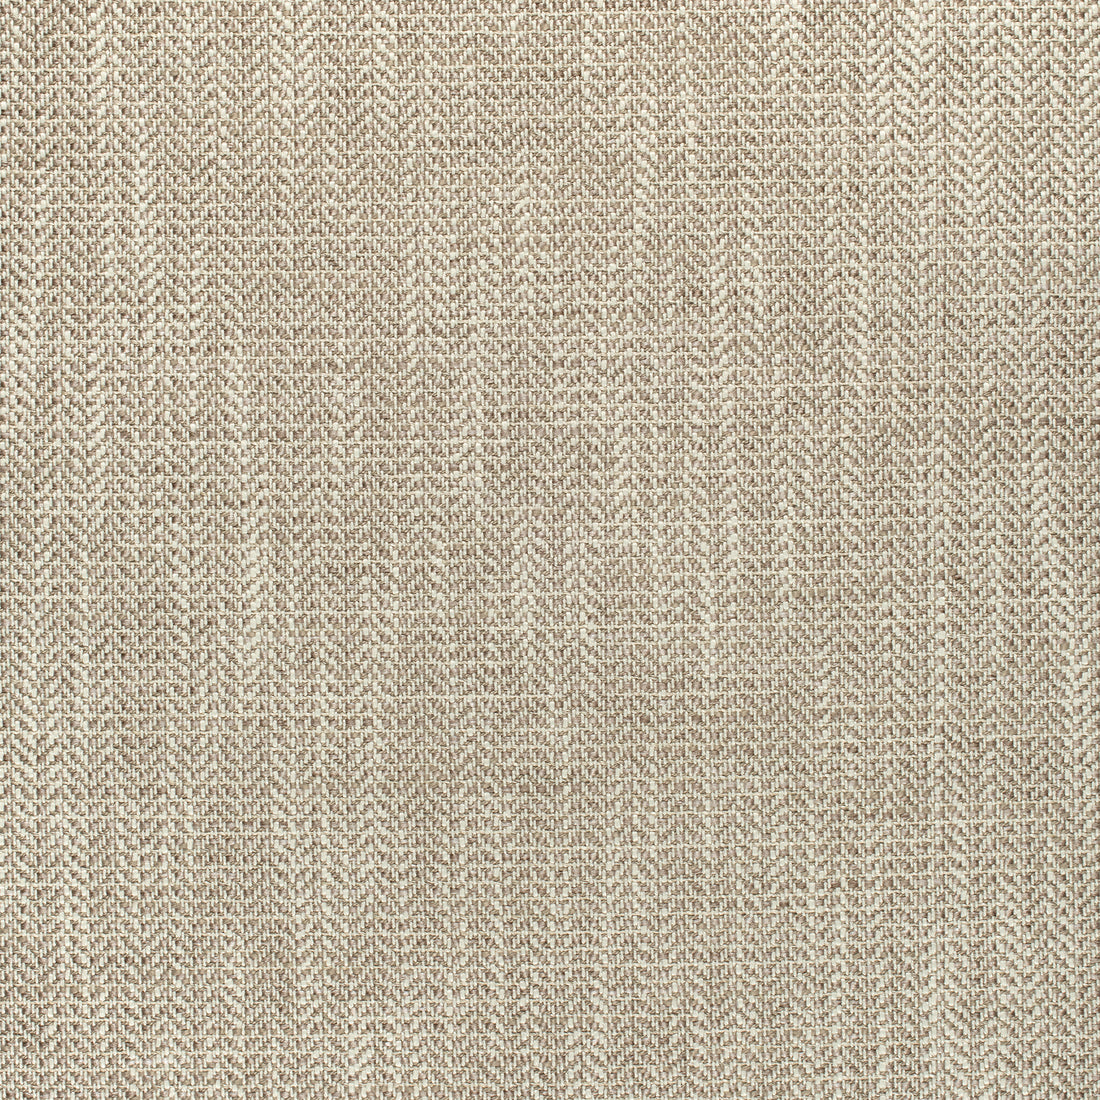 Ashbourne Tweed fabric in stone color - pattern number W80605 - by Thibaut in the Pinnacle collection